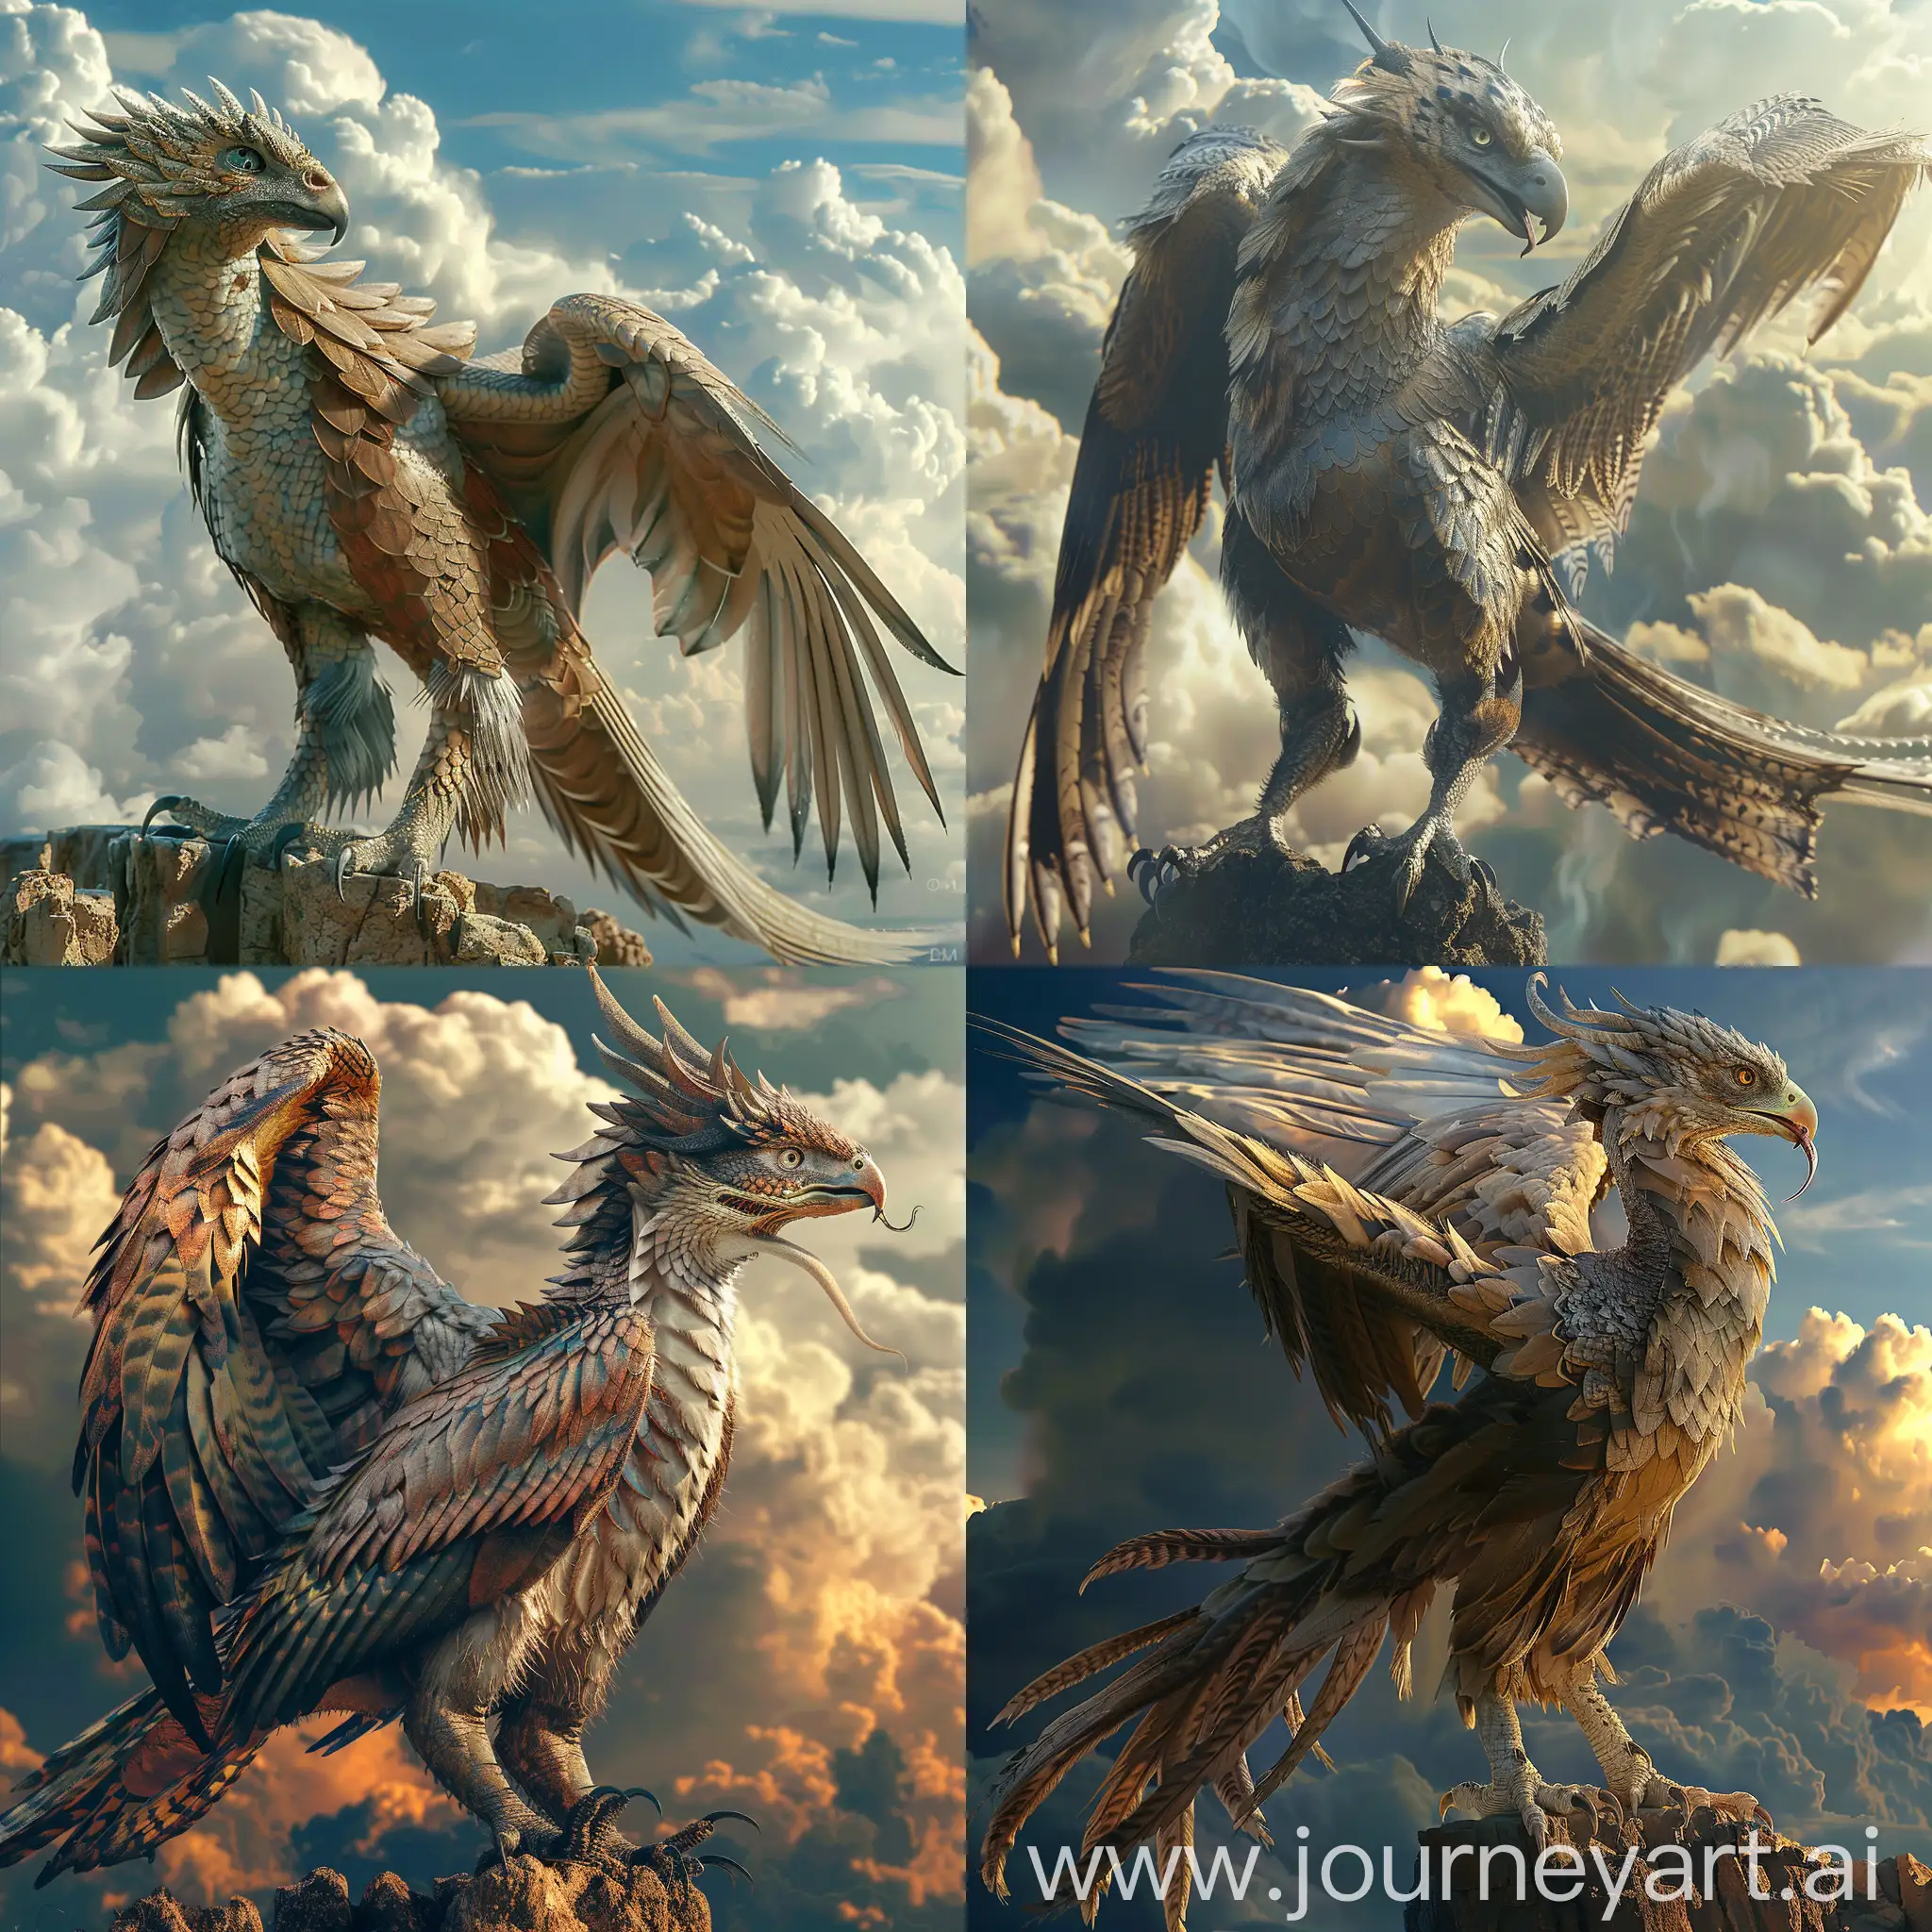 Wyvern, dragon, falcon face, feathers and scales, 4K, cinematic, spectacular clouds in the background, standing on a cliff, membrane wings, lizard tongue, claws on wing
